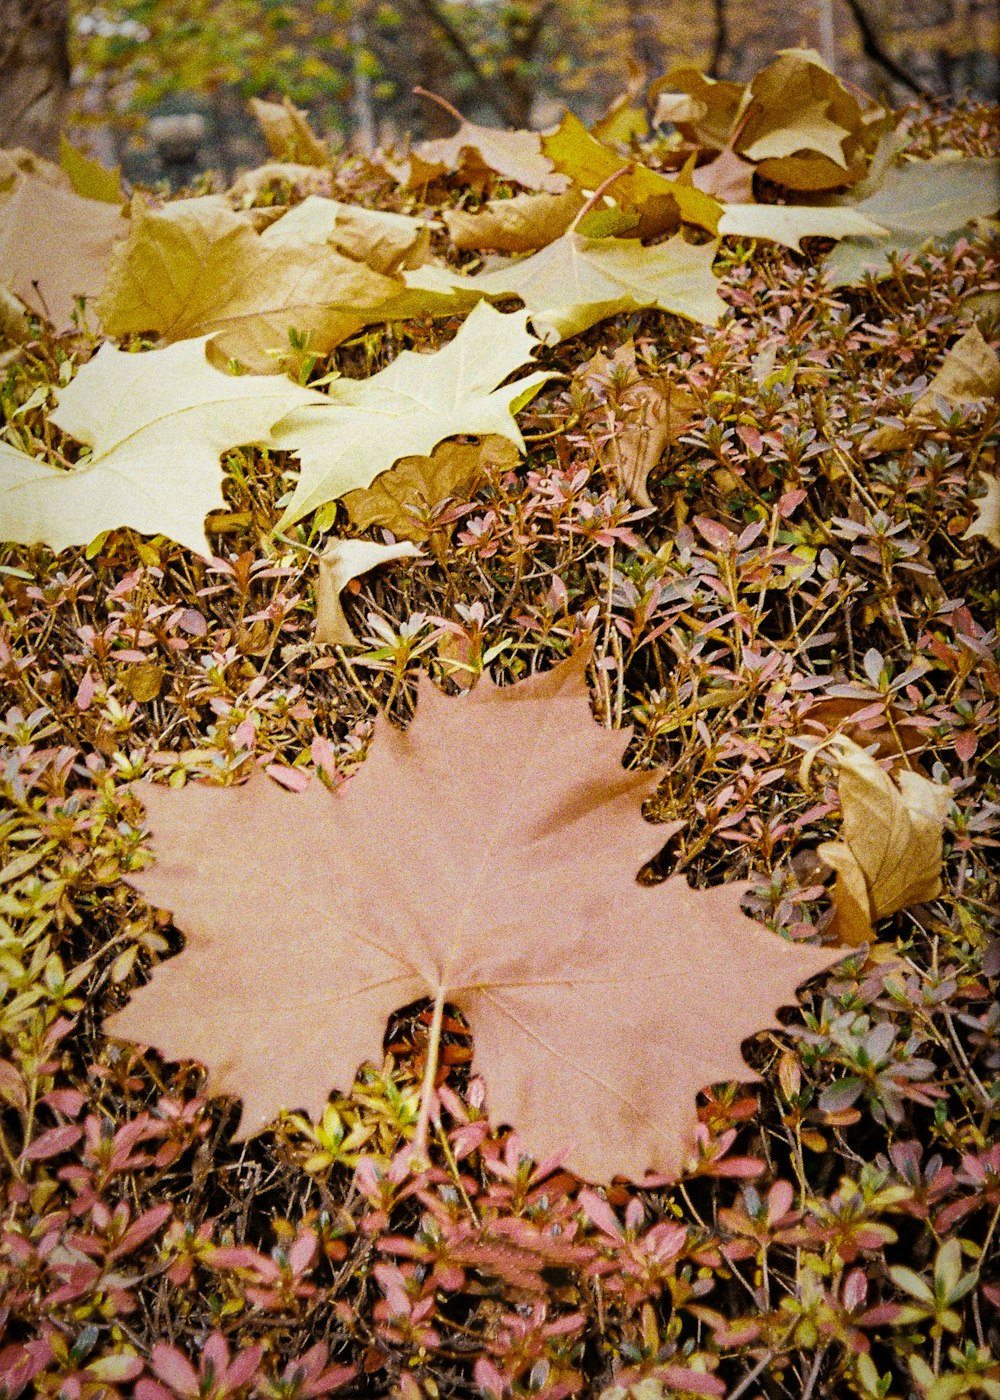 a leaf laying on the ground surrounded by leaves